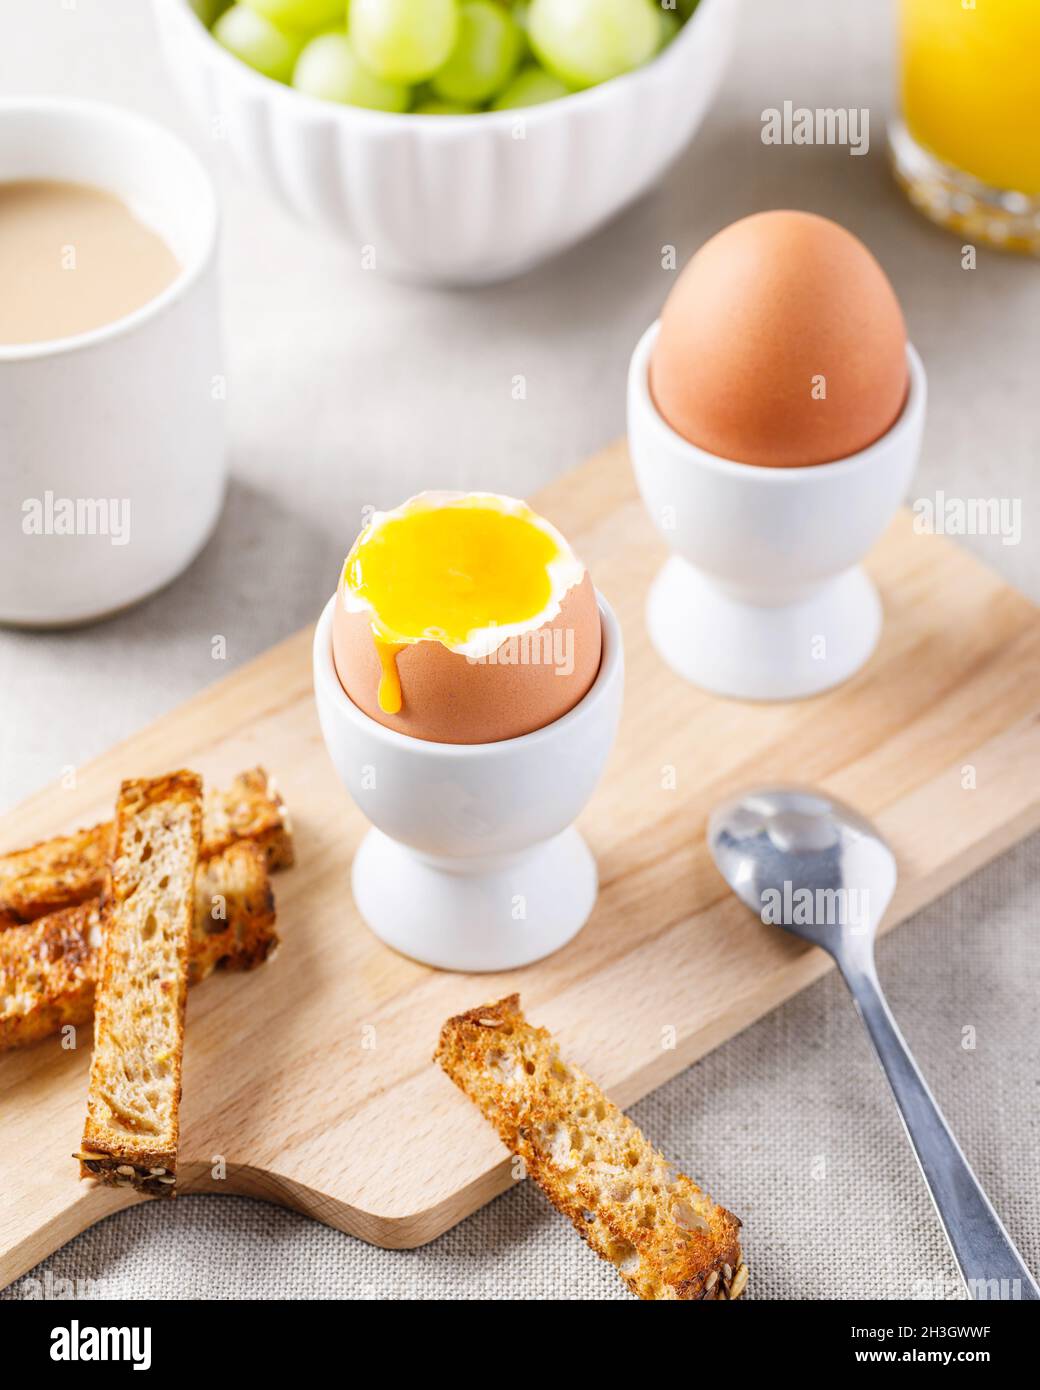 Two soft-boiled eggs in egg cups served on wooden cutting board with toasted bread for breakfast. Food background. Stock Photo